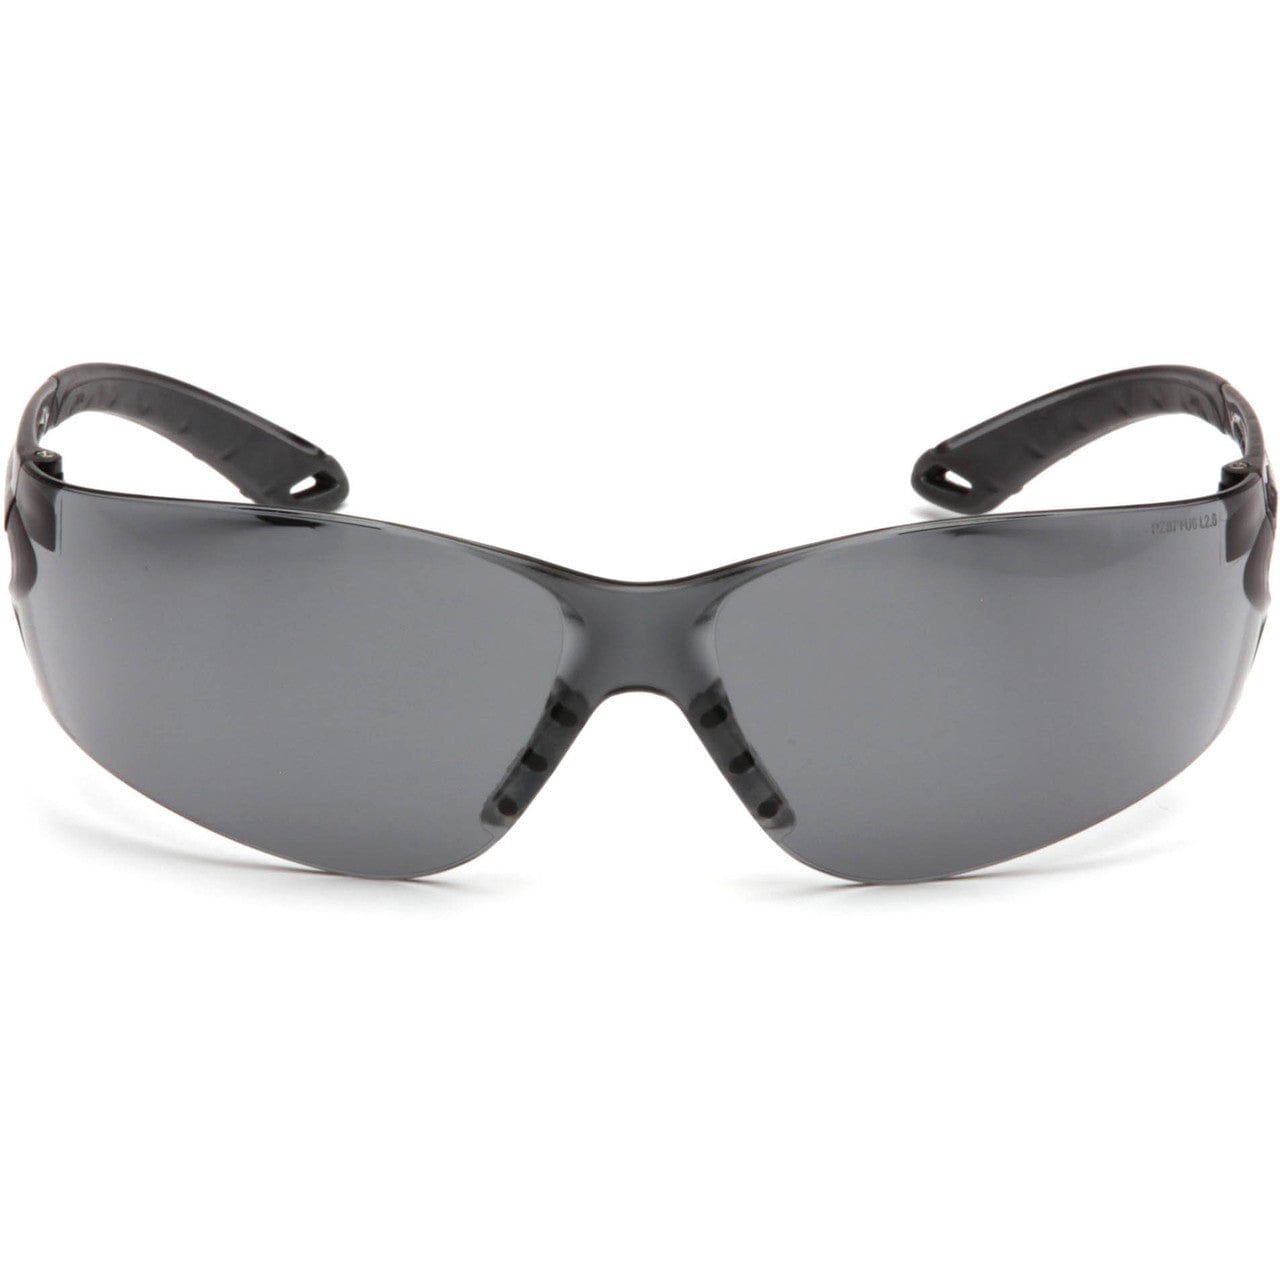 Pyramex Itek Safety Glasses with Gray Anti-Fog Lens S5820ST Front View